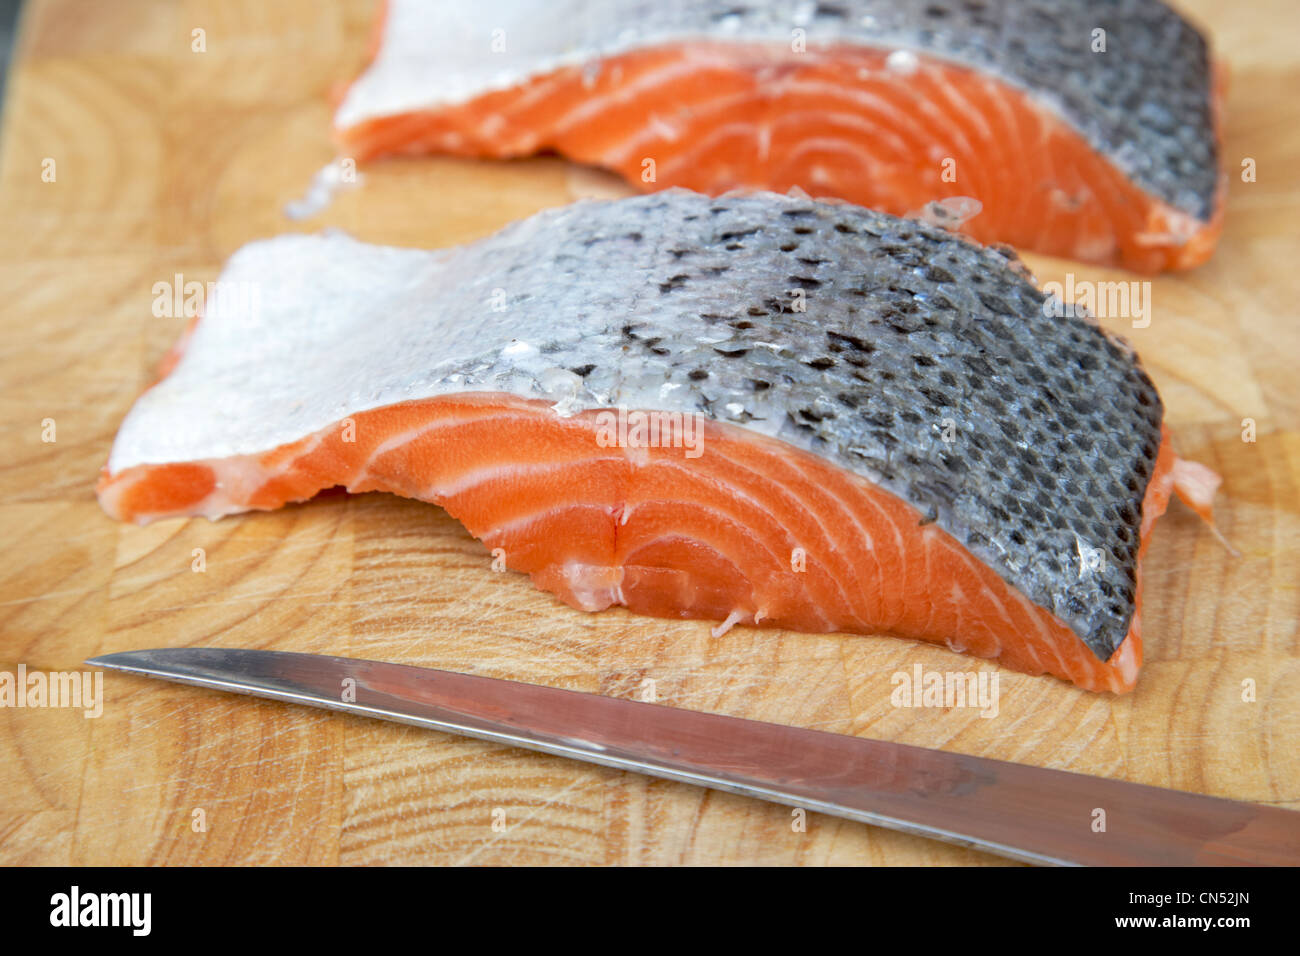 fresh salmon fillet cut into steaks and portions Stock Photo